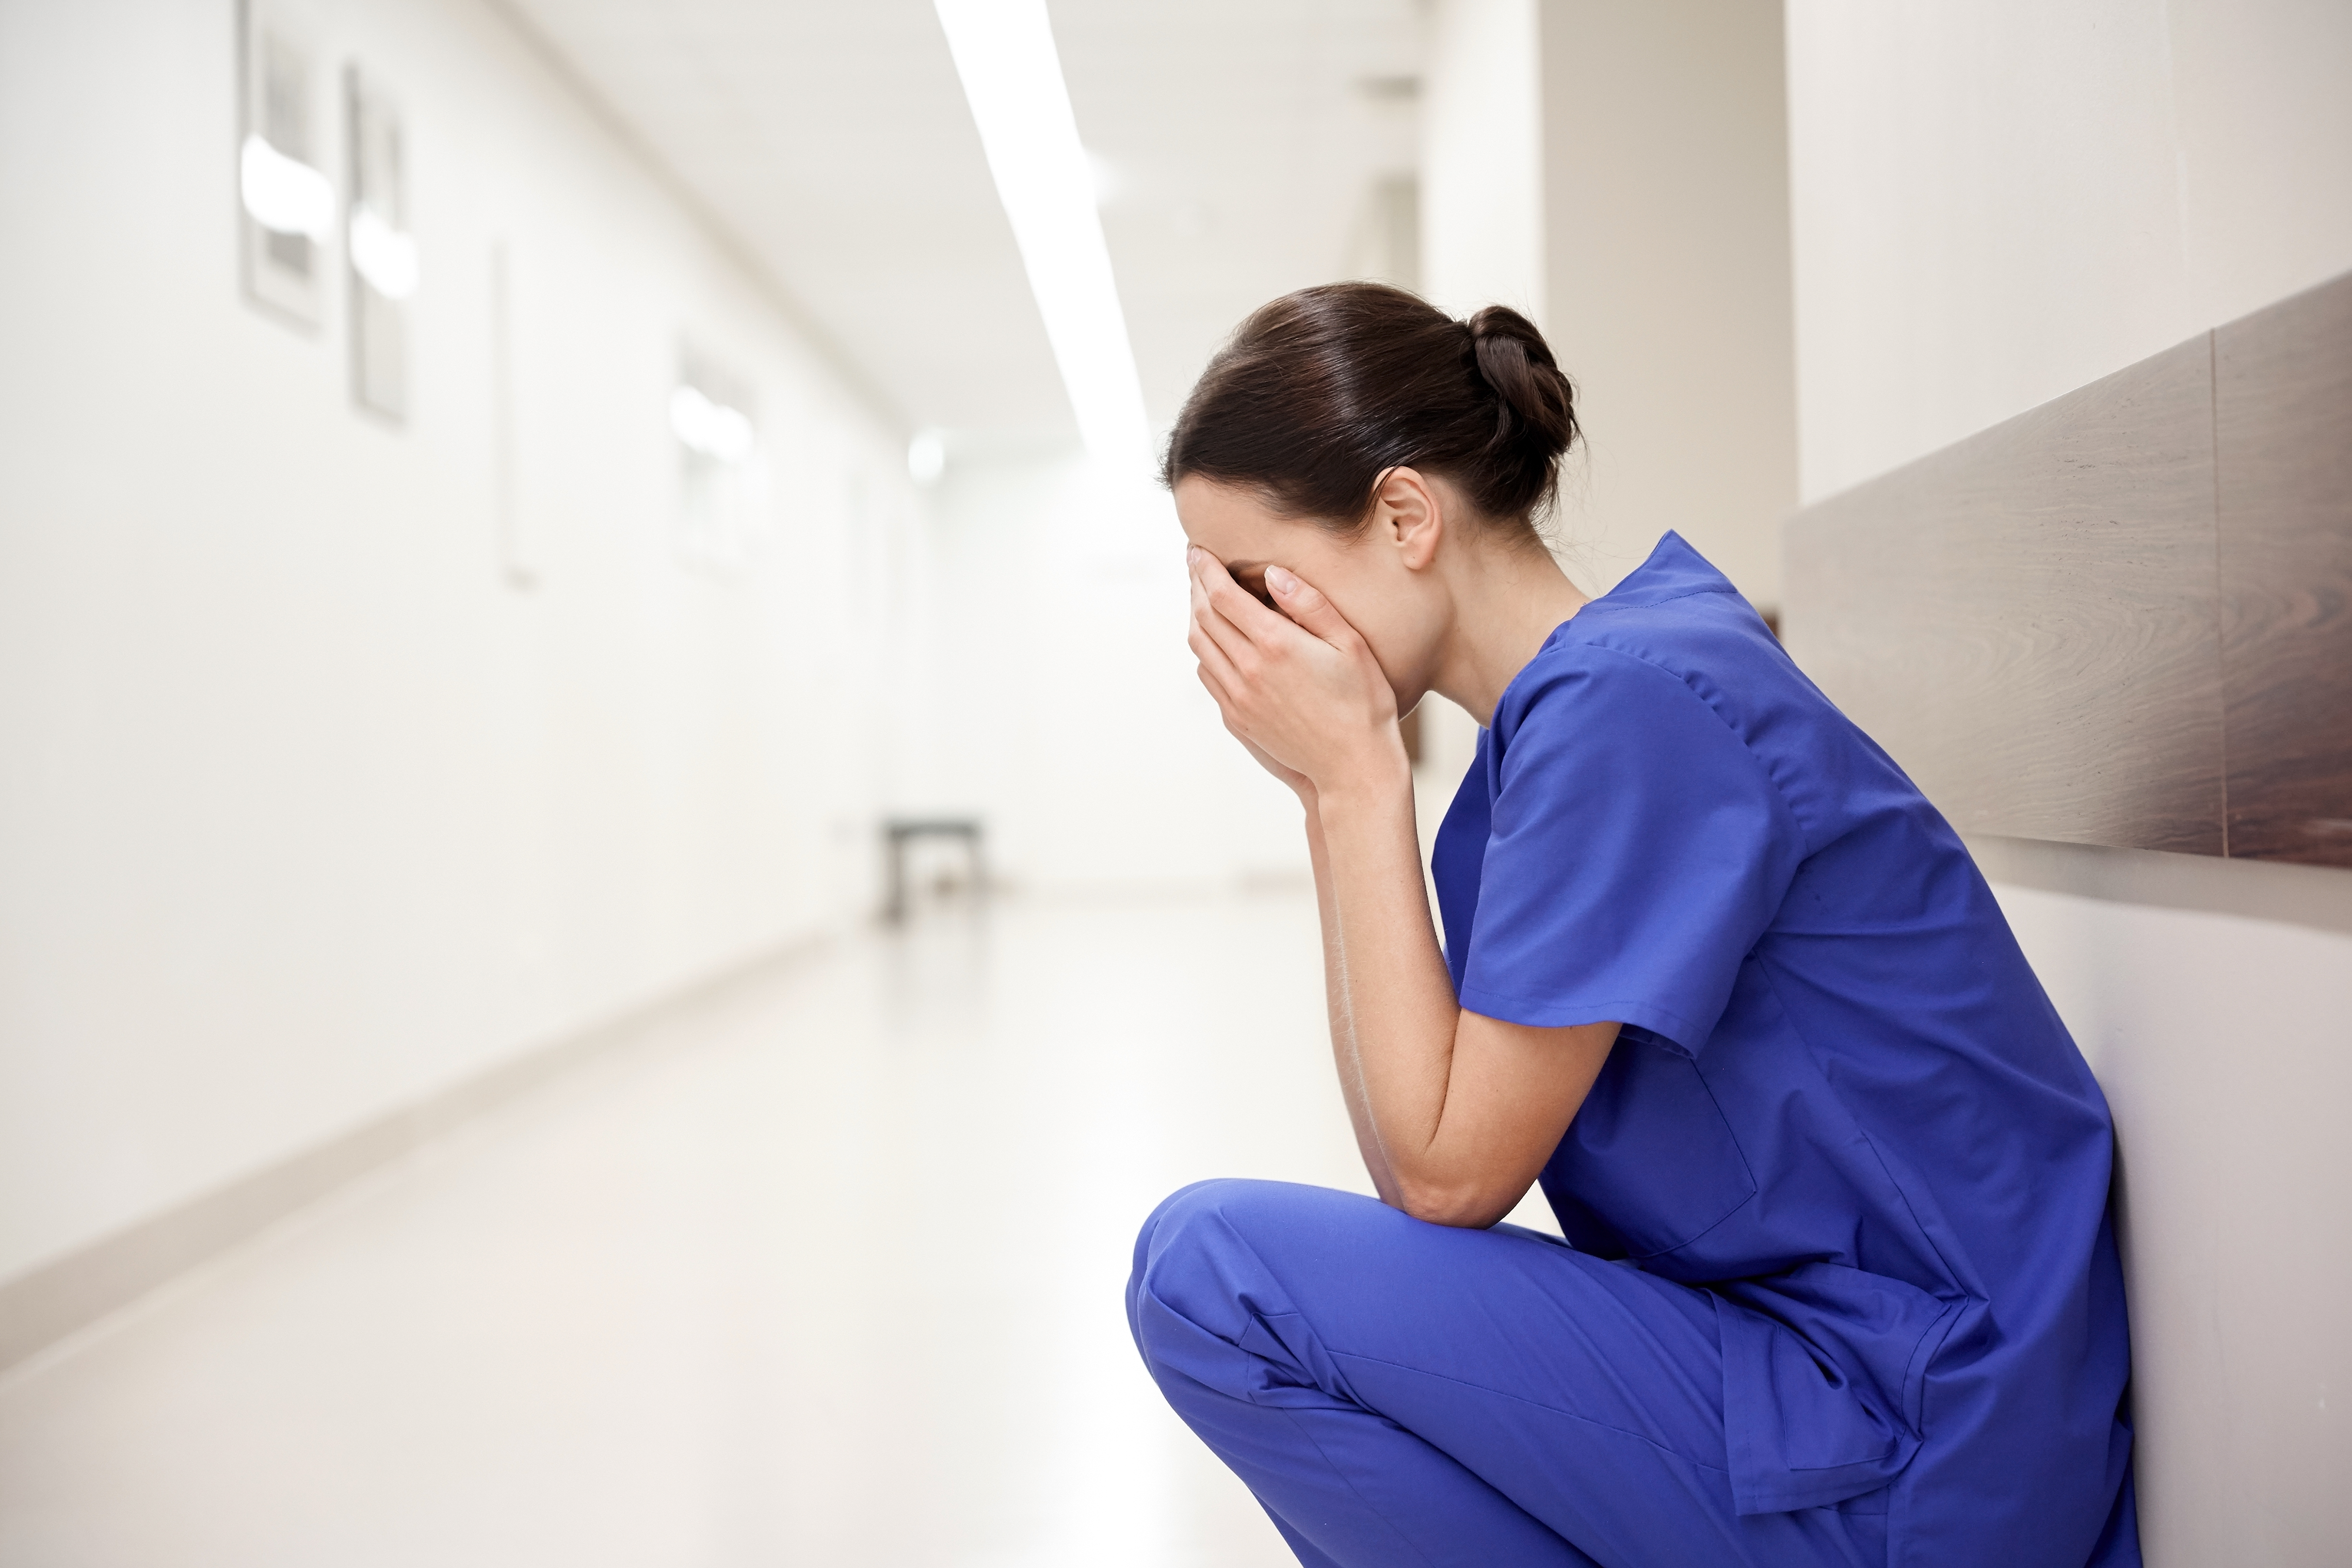 Crying female nurse at hospital | Source: Shutterstock